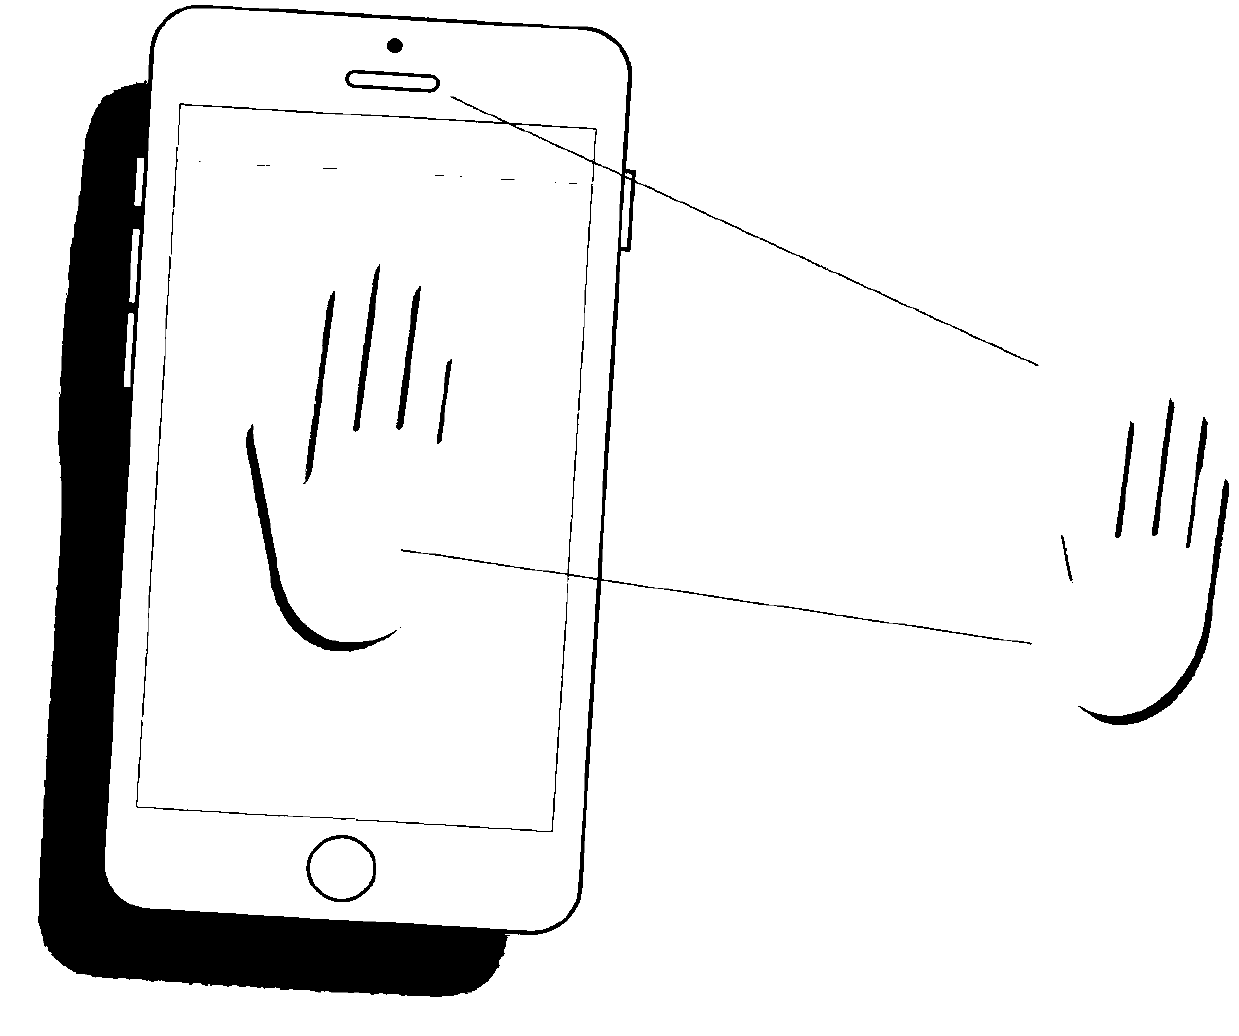 Non-contact palm print identity authentication method